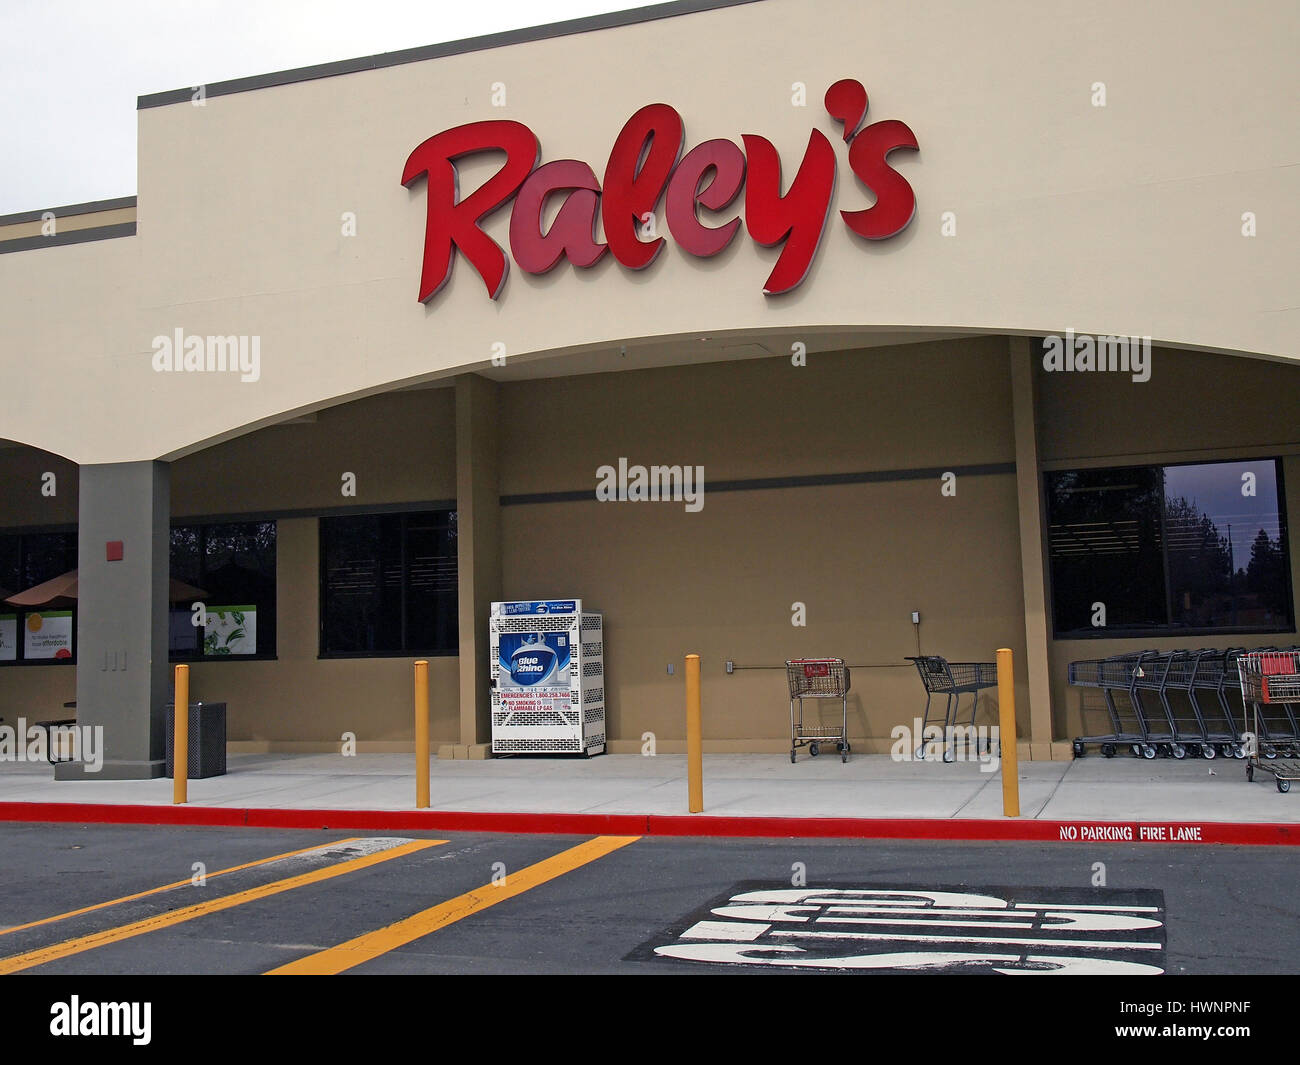 Raley's Family-owned, American Grocery Stores